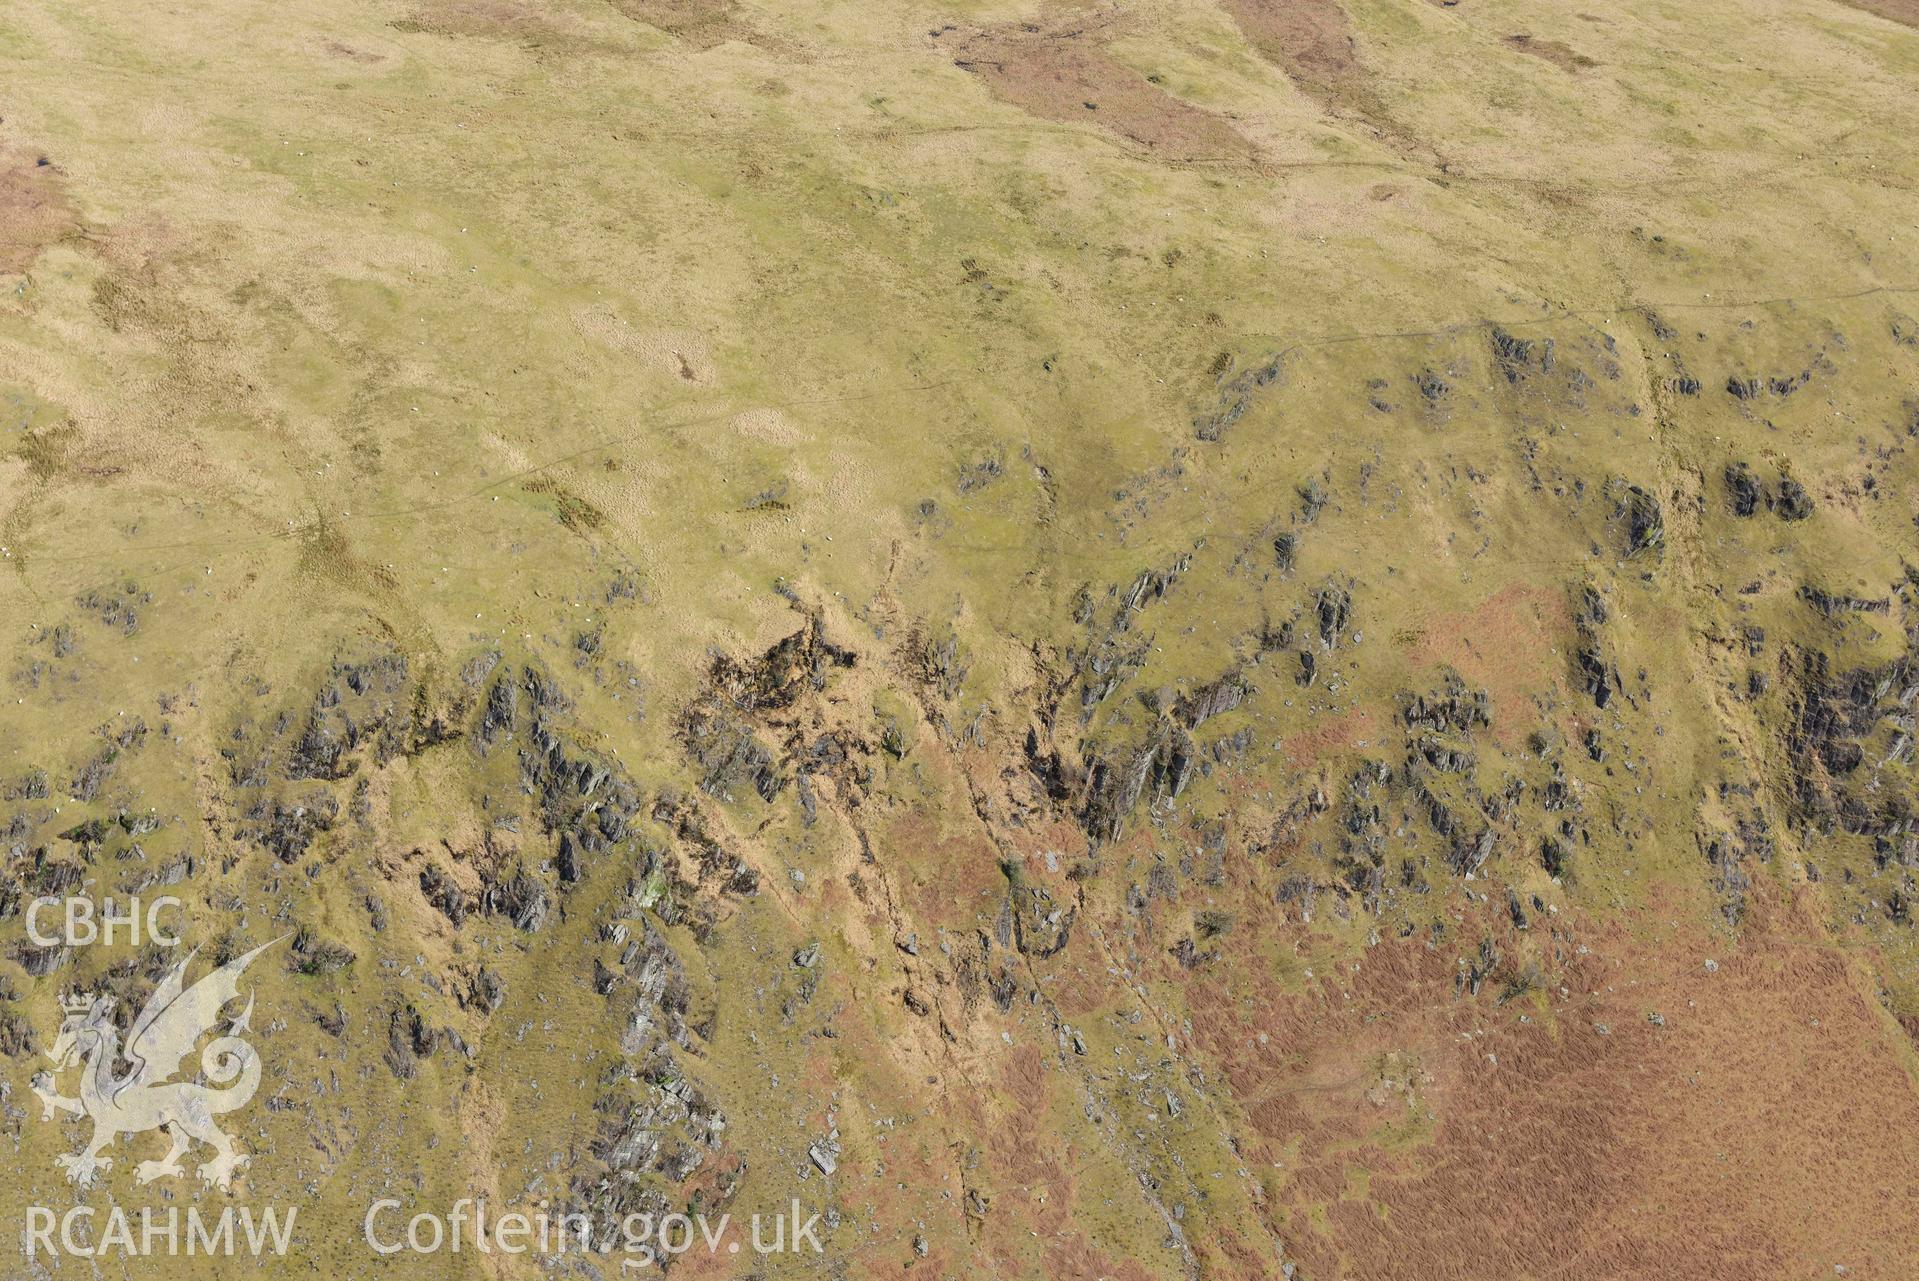 Esgair Irfon cairn, general view of location. Oblique aerial photograph taken during the Royal Commission’s programme of archaeological aerial reconnaissance by Toby Driver on 14 March 2022.